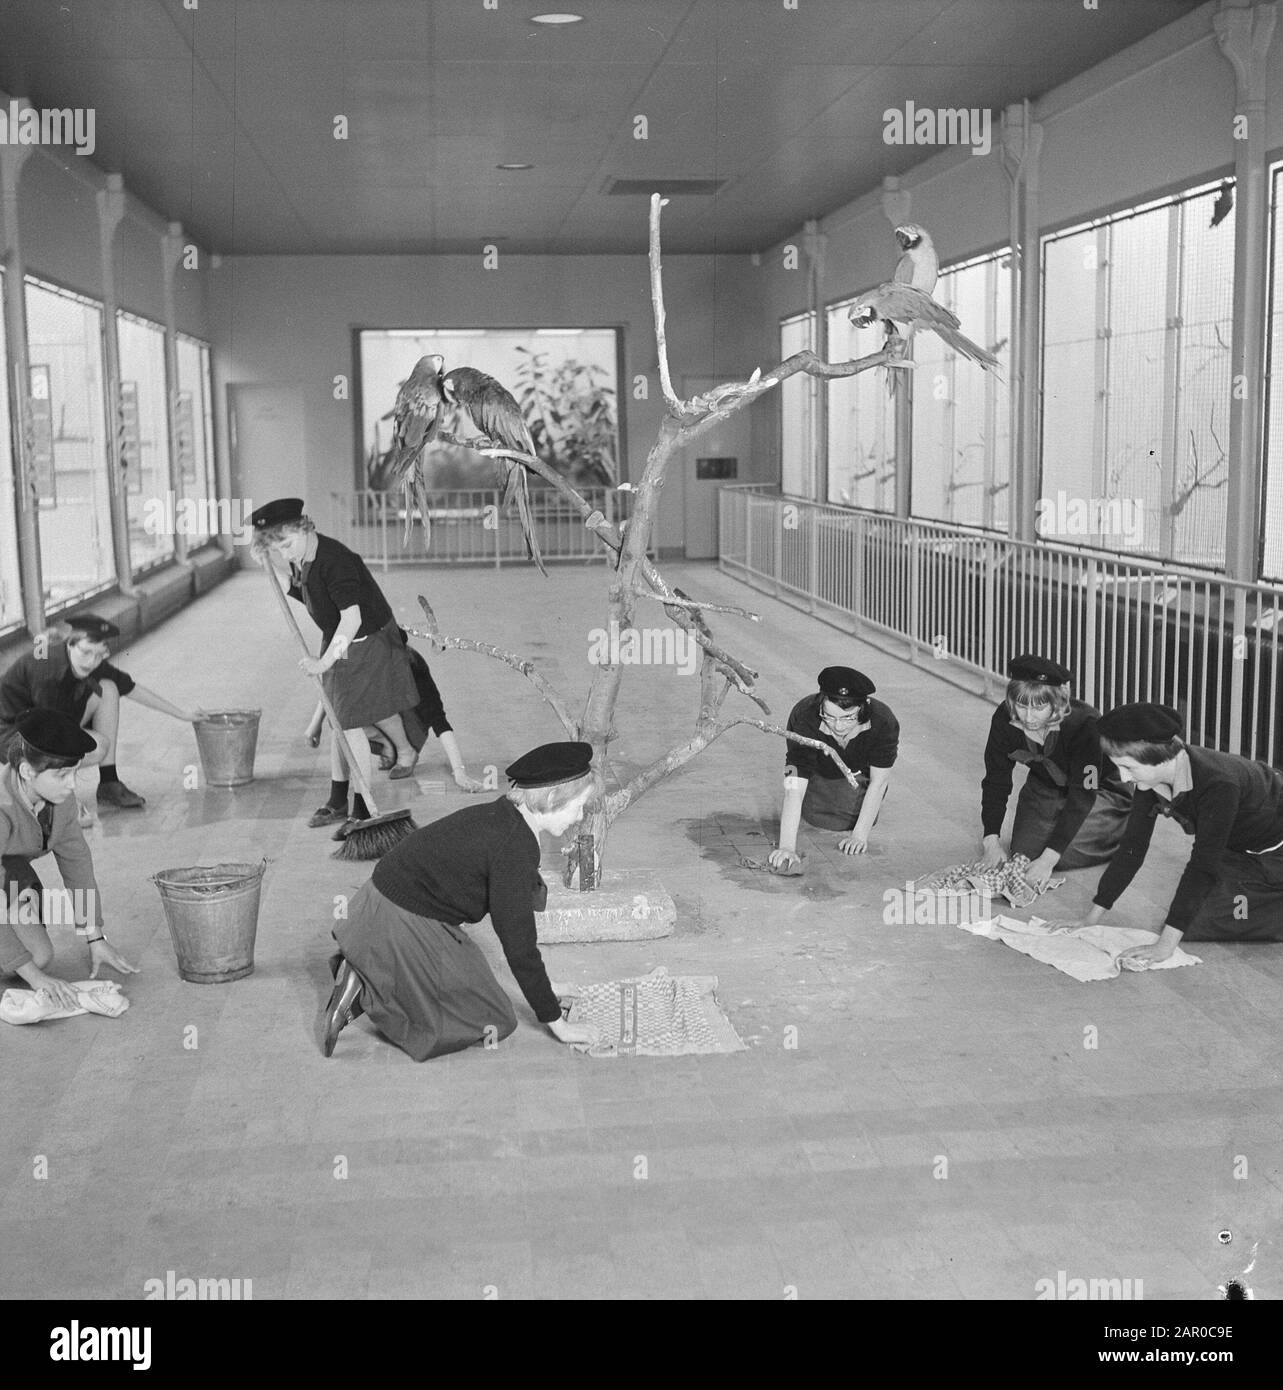 Heitty for a chore, Boy Scouts clean the night places of Artis. The birdhouse Date: 18 april 1963 Location: Amsterdam, Noord-Holland Keywords: zoos, boy scout, parrots Institution name: Artis Stock Photo